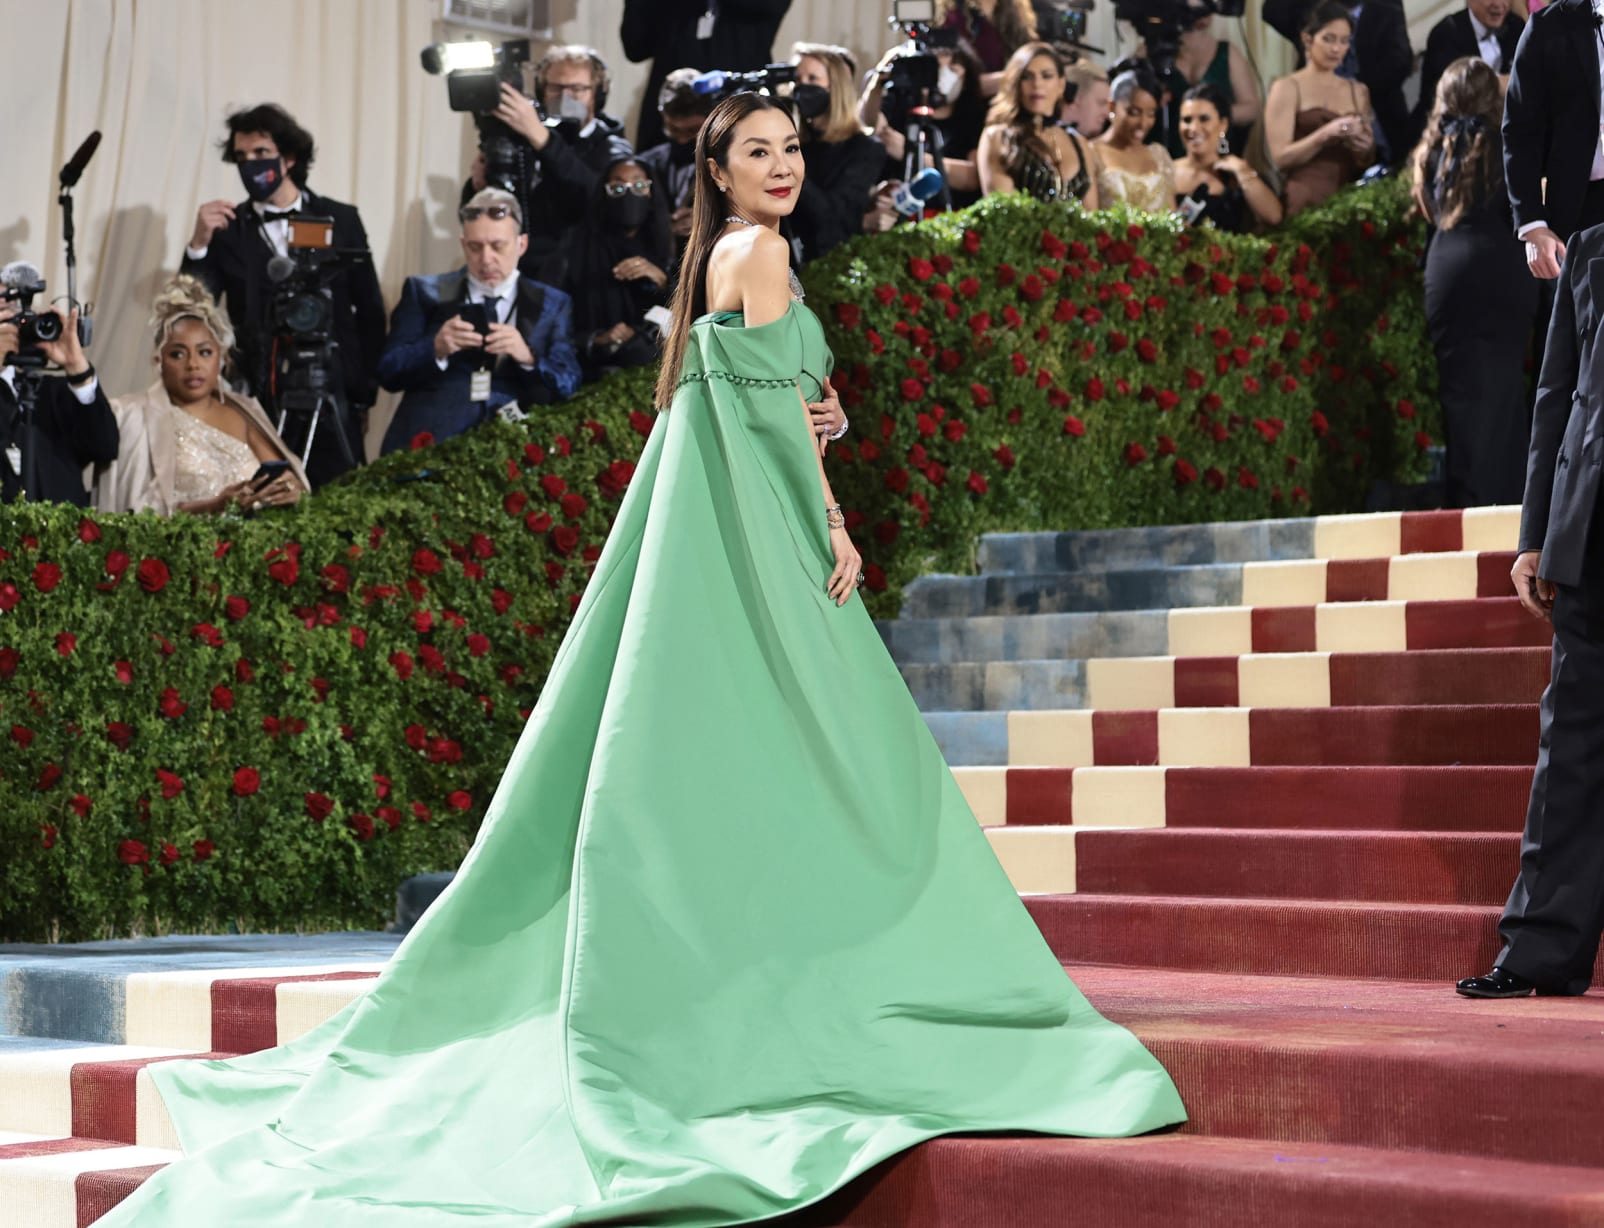 Michelle Yeoh wore a strapless, caped emerald green dress.